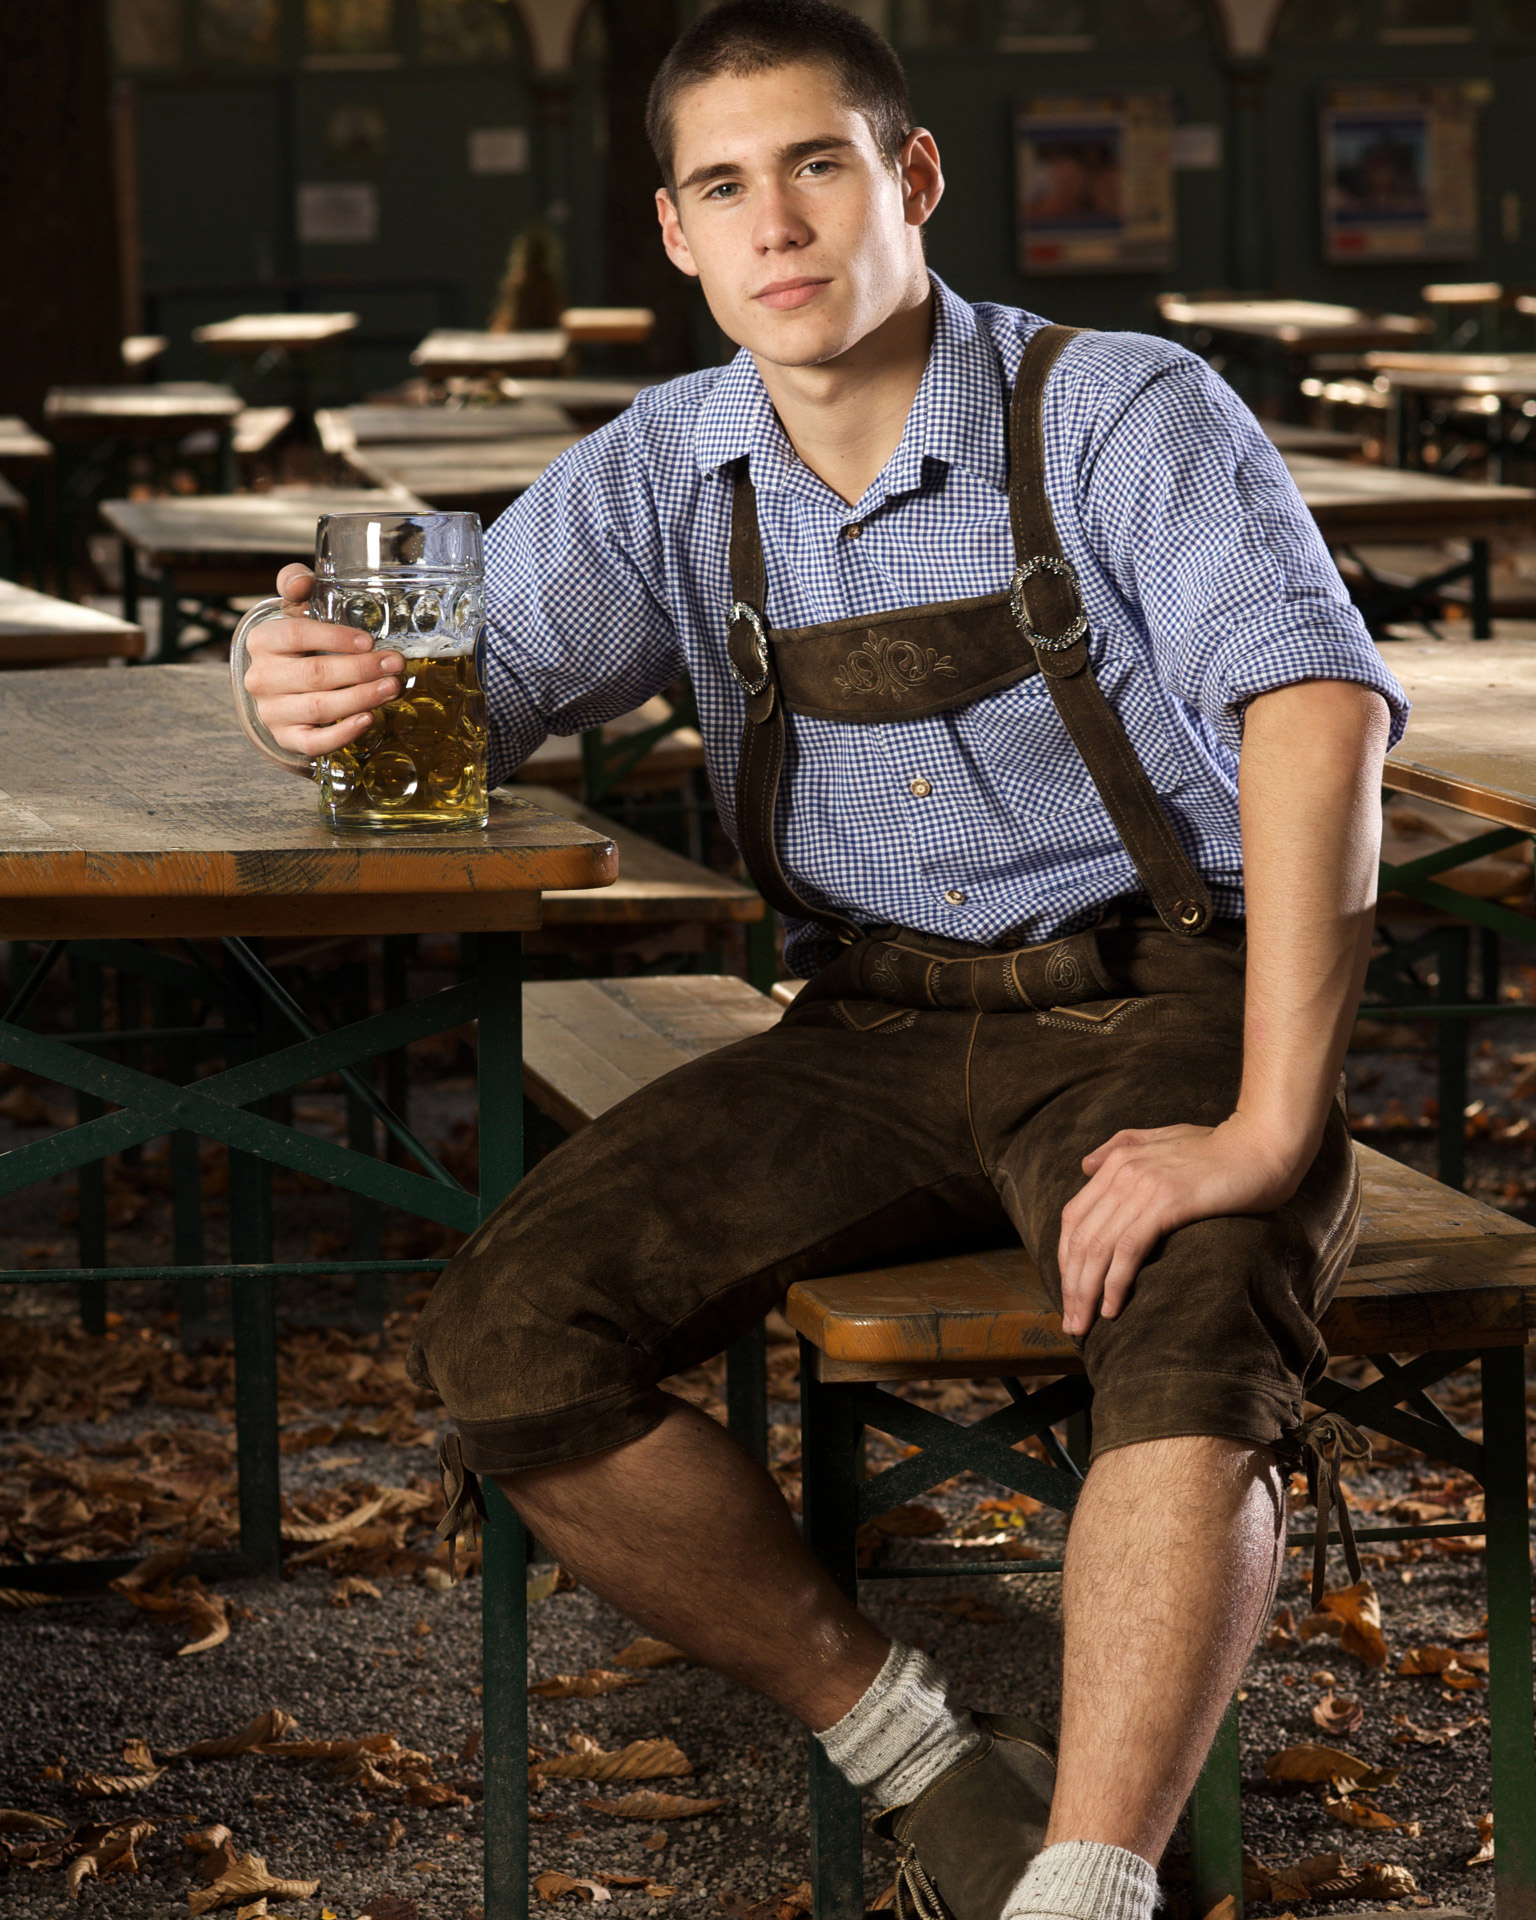 When you come to Oktoberfest, most of the visitors will be dressed like this. Heck, if you visit a beer garden or other tourism draw, you might spot folks kitted out this way as well. Fabian Lang is not a traditional Bavarian farmer but a professional skateboarder who likes to represent his roots.